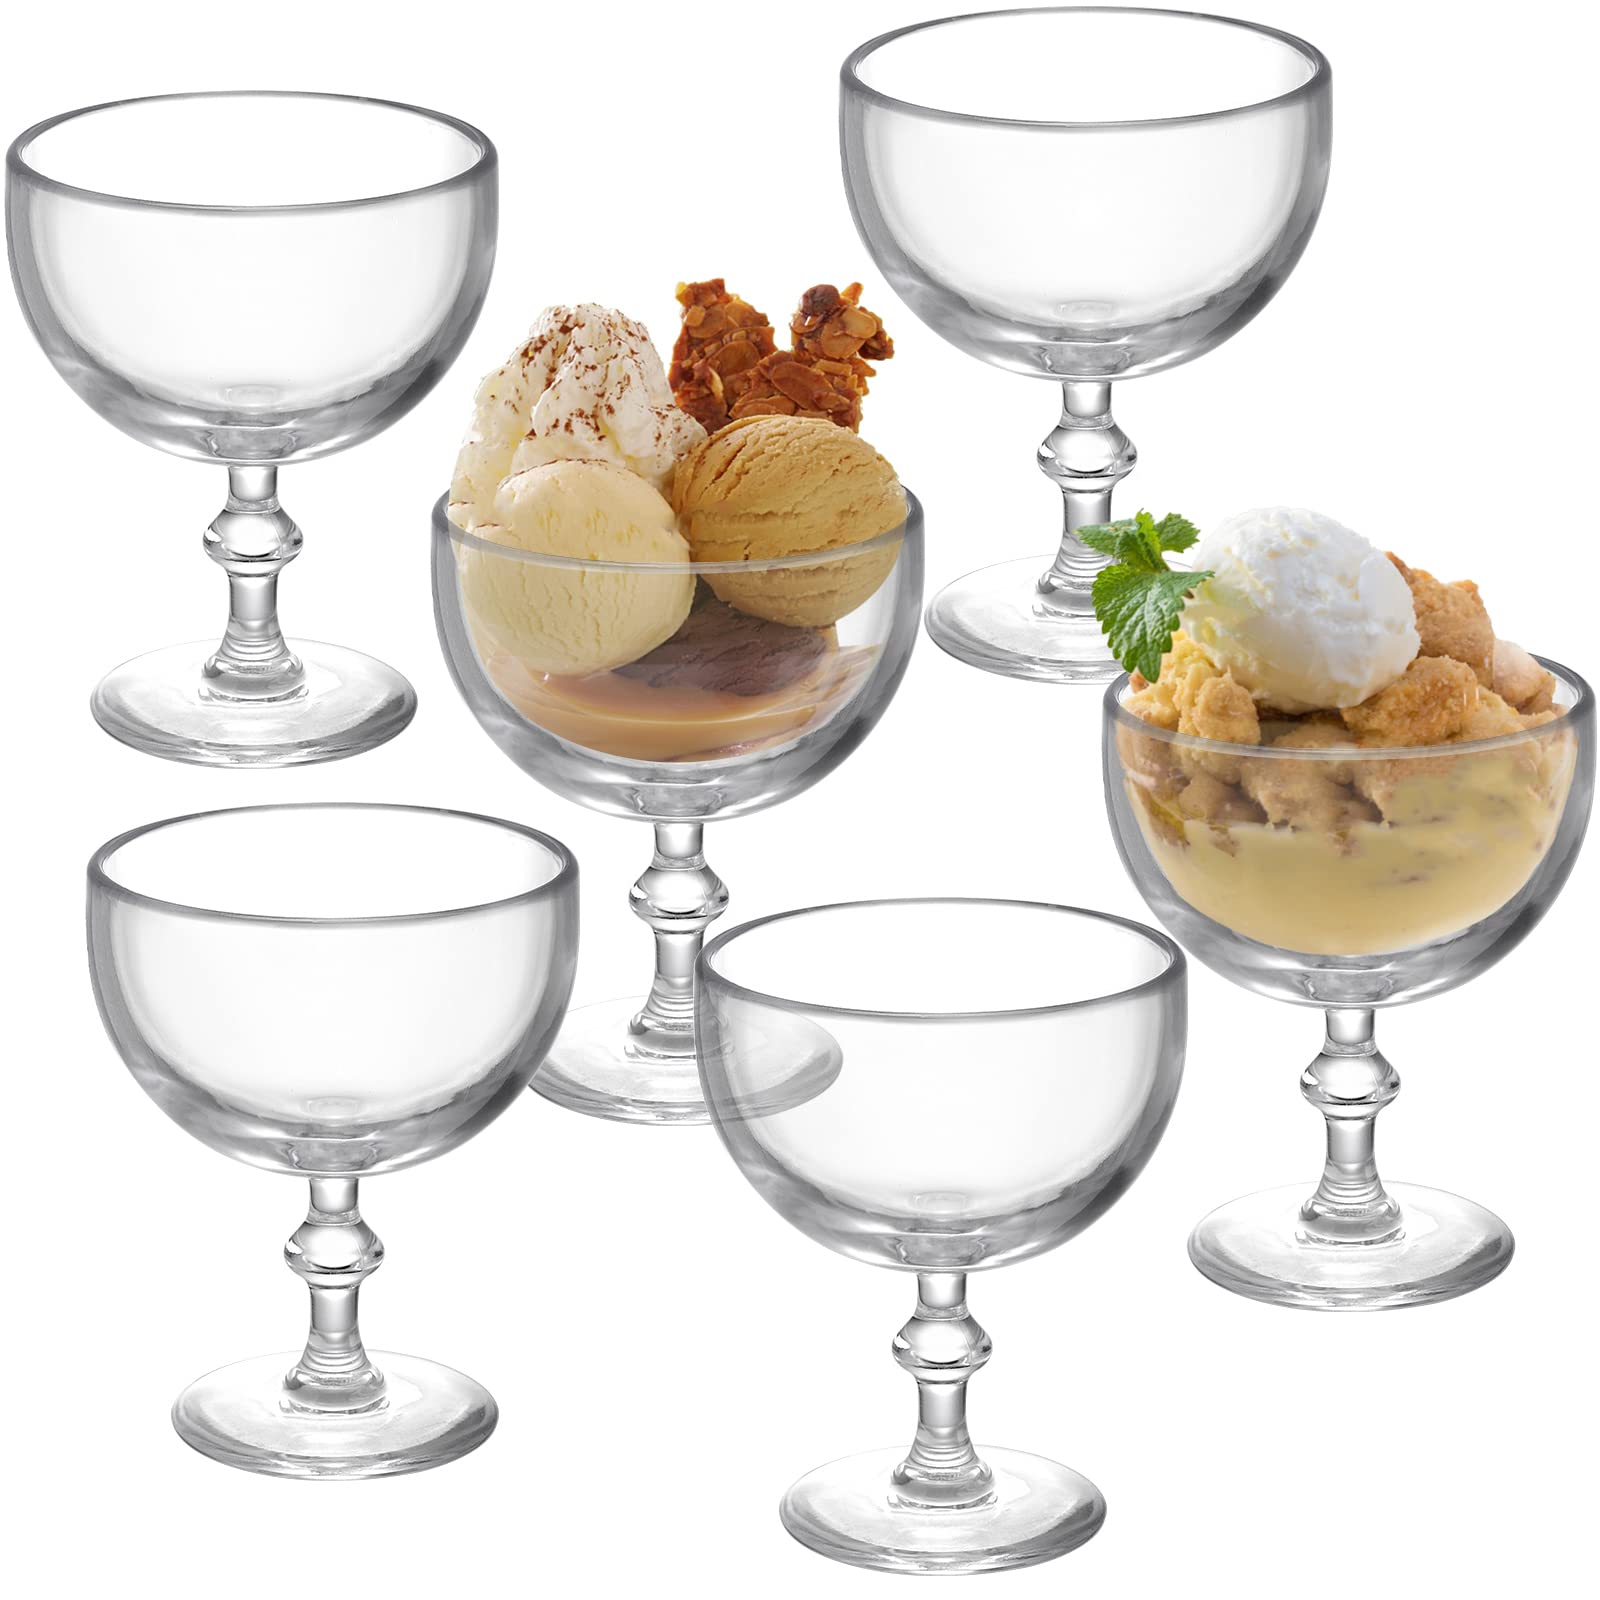 Hiceeden 6 Pack Reusable Acrylic Dessert Cups, 11 Oz Unbreakable Clear Taster Ice Cream Cups, Footed Trifle Bowl for Party Snack, Sundae, Smoothie, Pudding, Cocktail, Fruit, Cereal